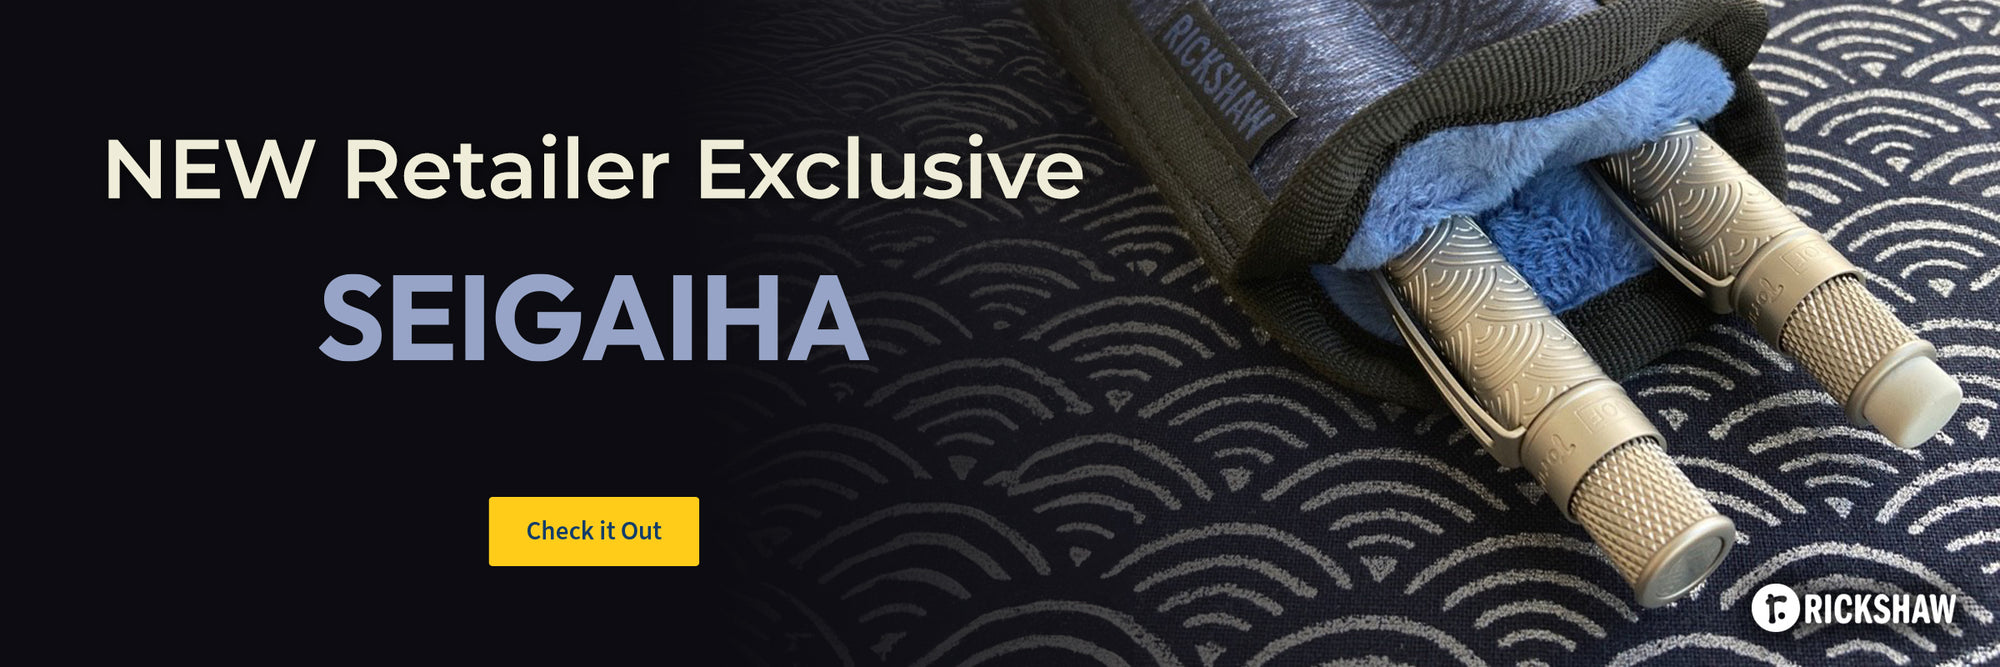 New Retailer Exclusive - Rickshaw Bagworks: Seigaiha | Check it out